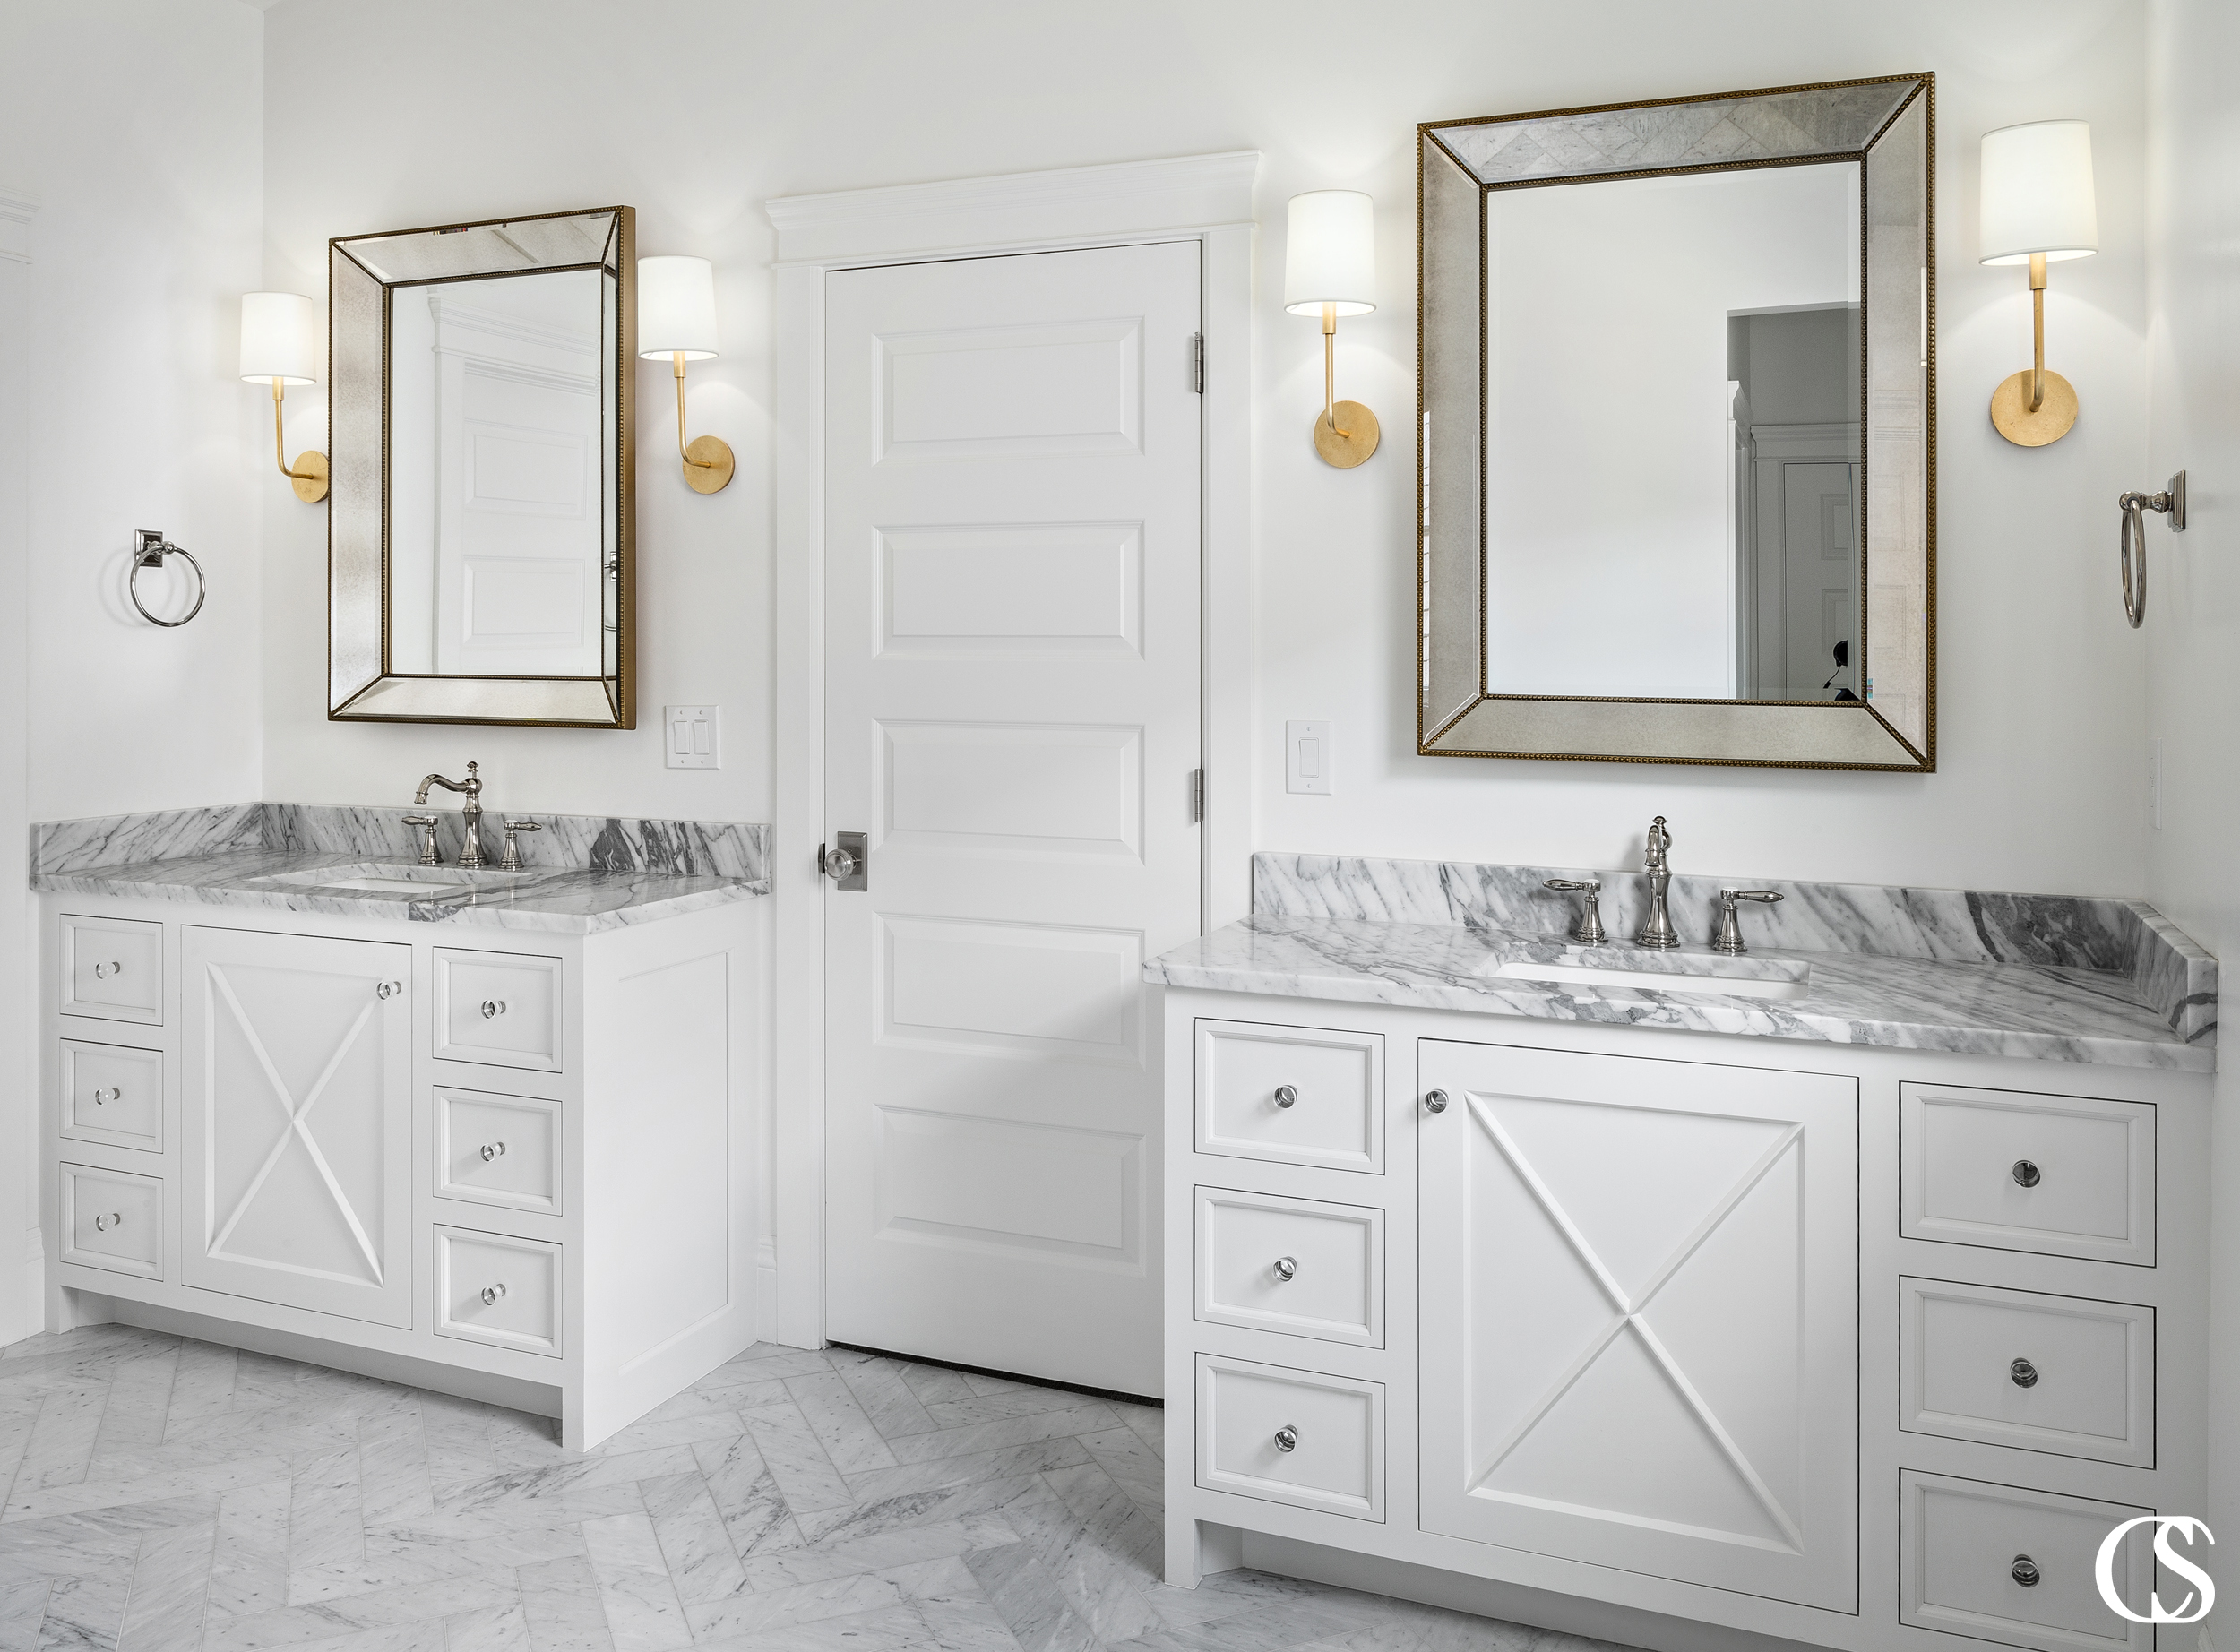 Bathrooms Christopher Scott Cabinetry, Custom Vanity Cabinets For Bathrooms